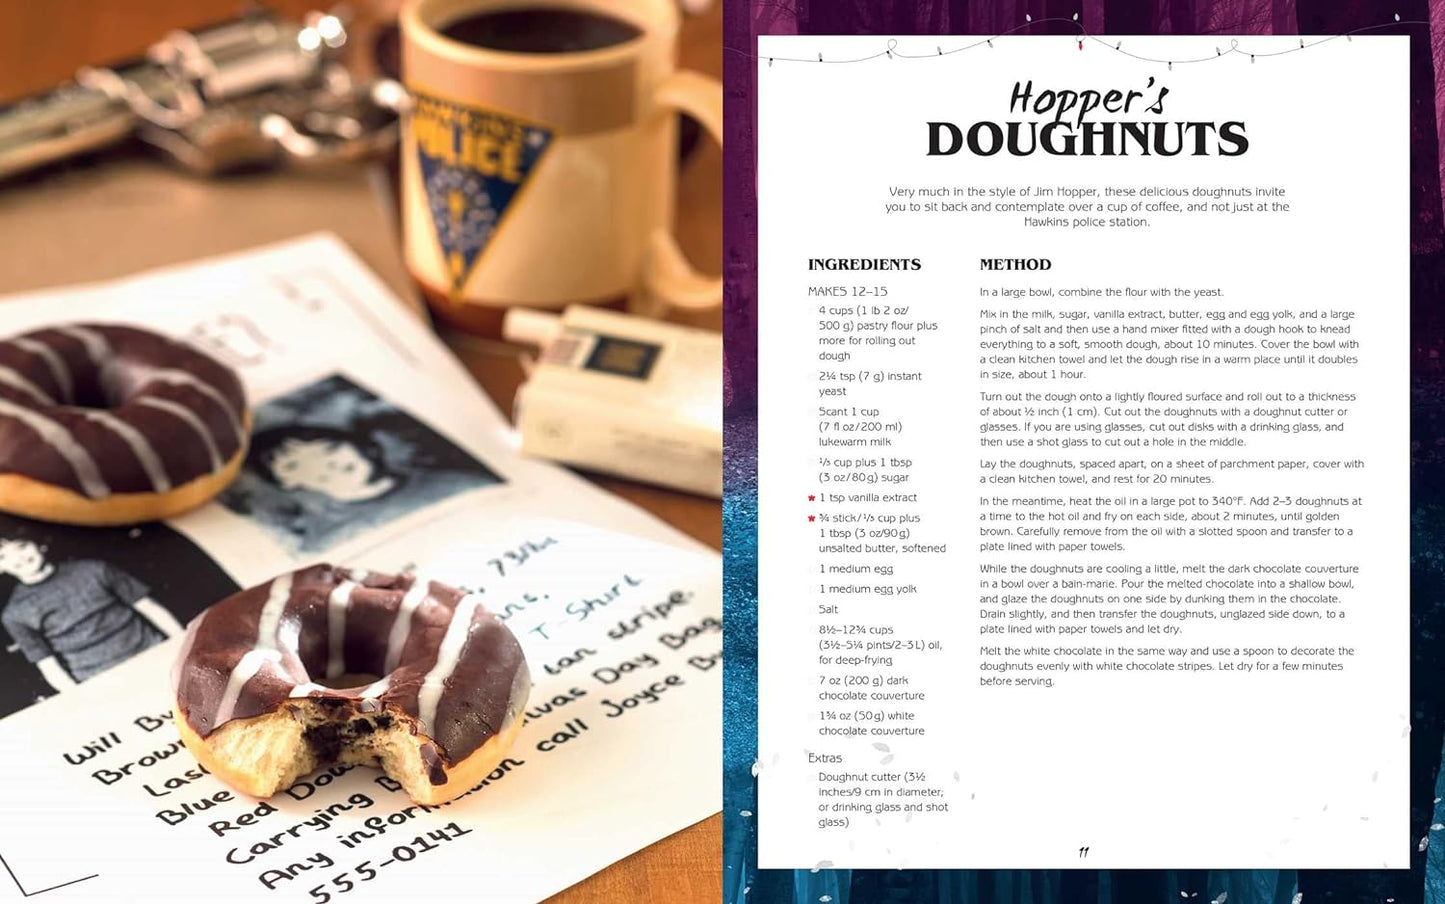 A two-page spread from the book. On the left are chocolate donuts sitting on a desk. Around them are a coffee cup with a police logo, a revolver, a pack of cigarettes, and photos of a missing child. On the right is a recipe for Hopper's doughnuts.